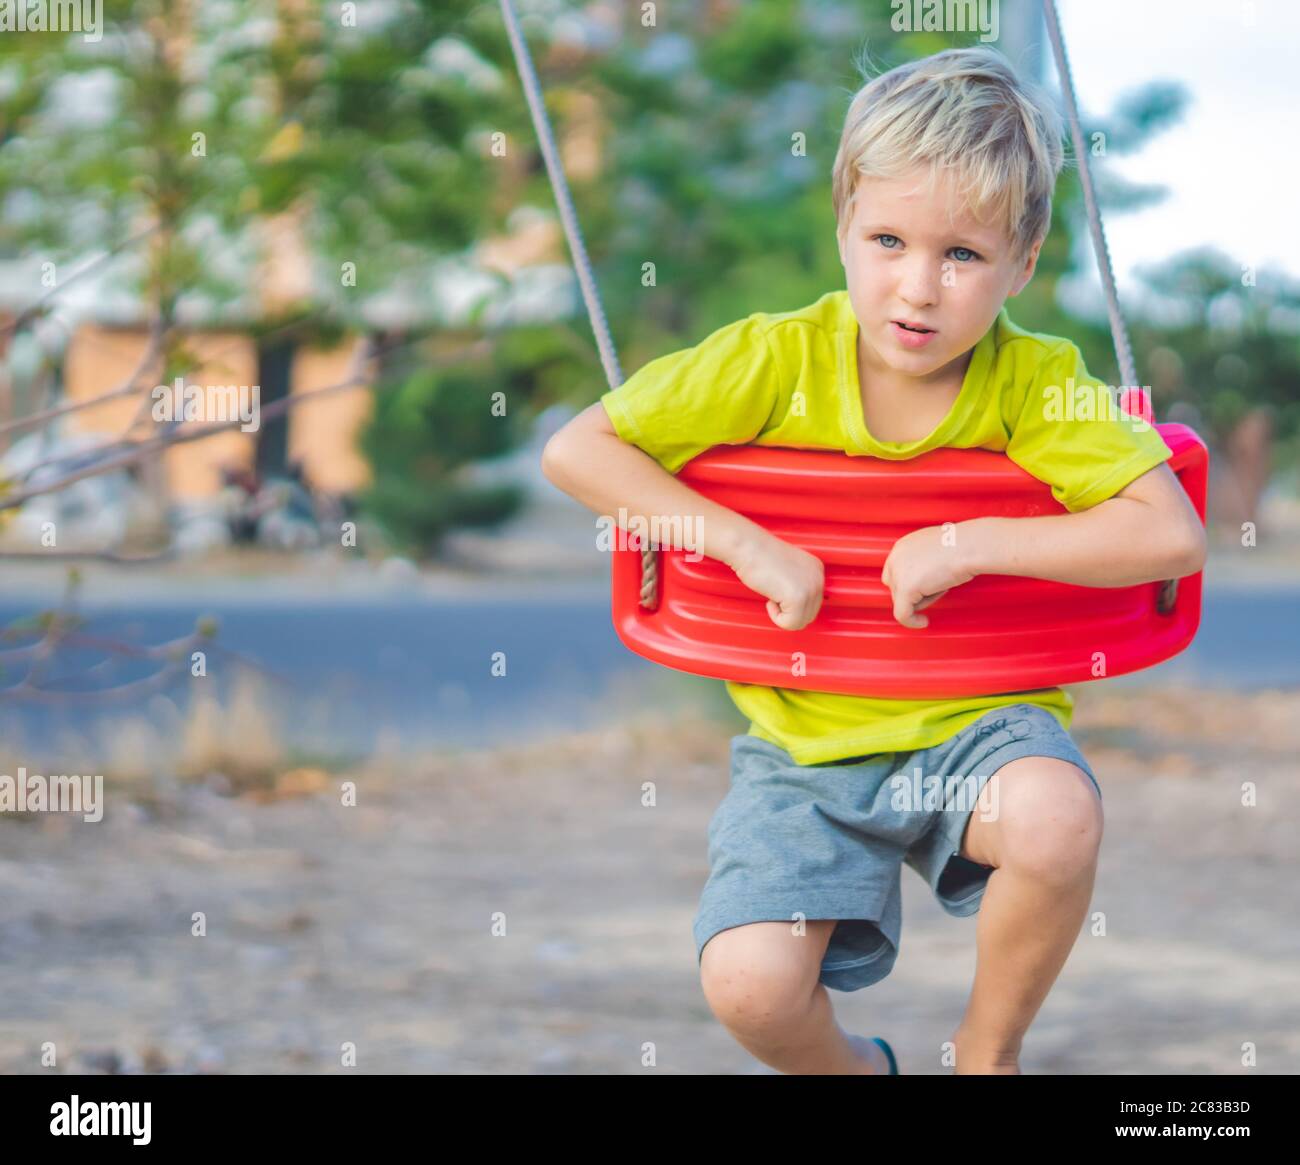 Sad lonely boy sitting on swing, waiting for friends or while parents are busy. Summer, childhood, leisure, friendship and people concept Stock Photo